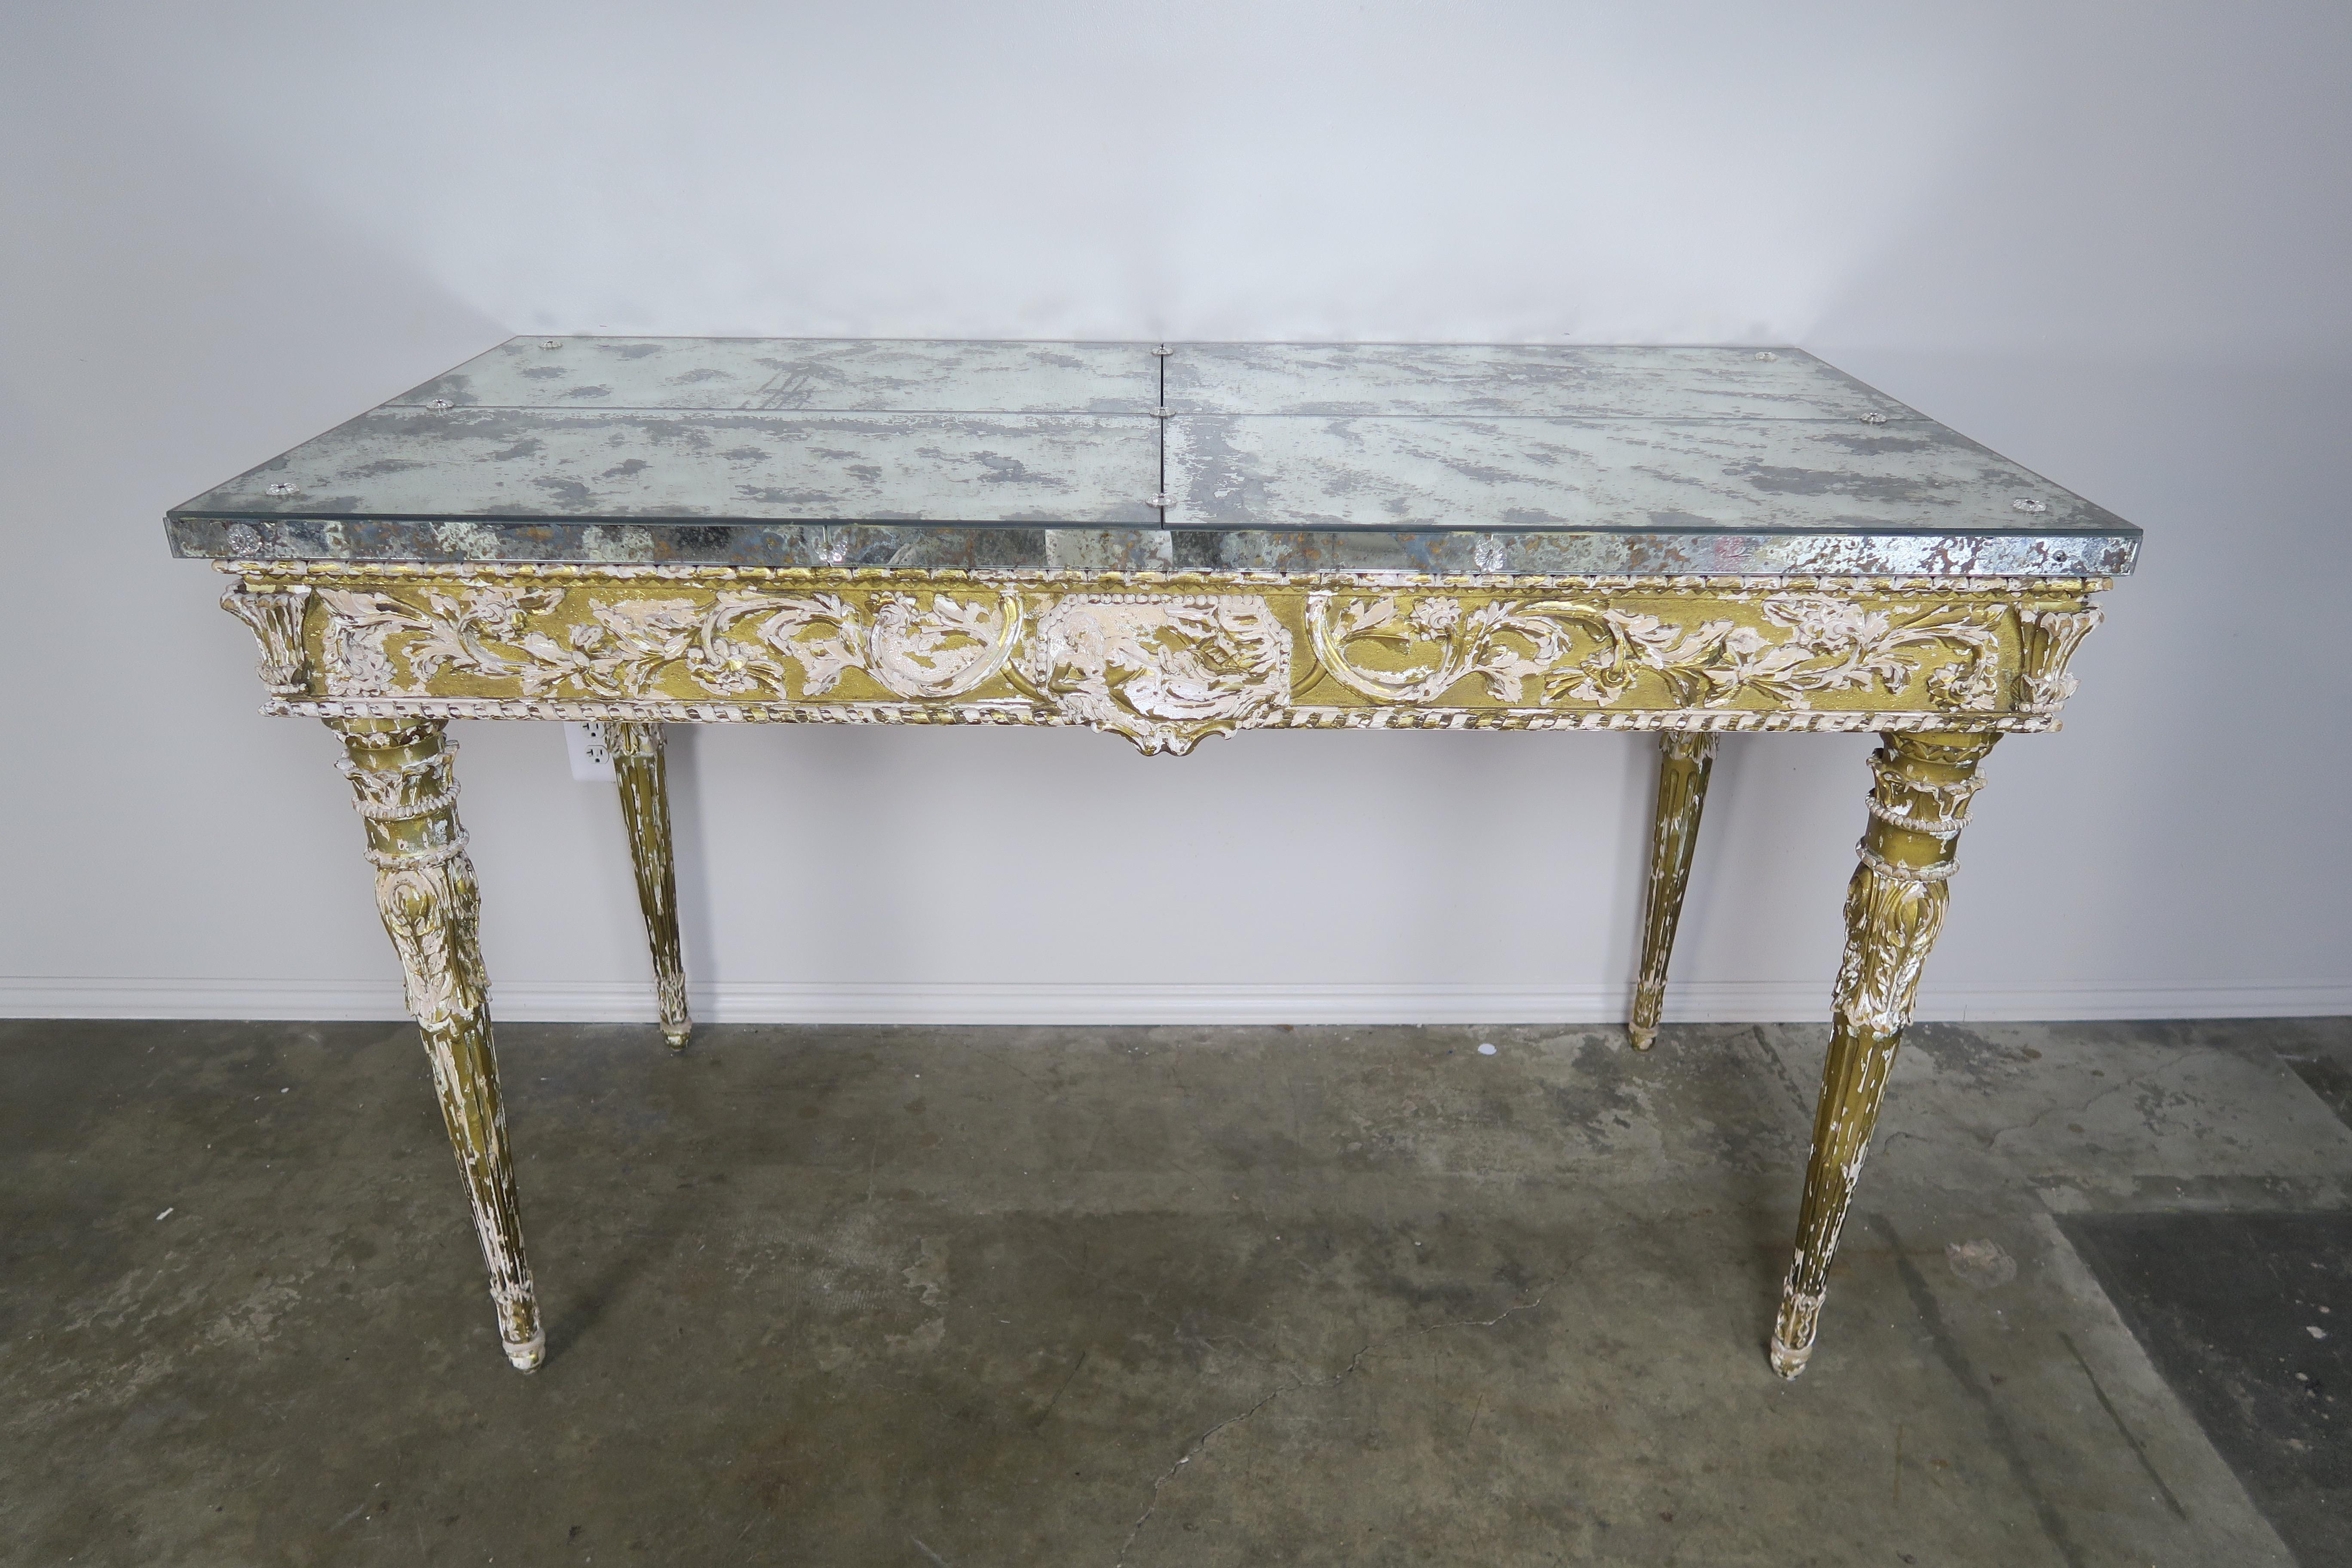 19th century Italian neoclassical style giltwood console standing on four straight tapered fluted legs. Beautiful intricate carving throughout including the figure of a reclining man and swirling acanthus leaves throughout. Worn 